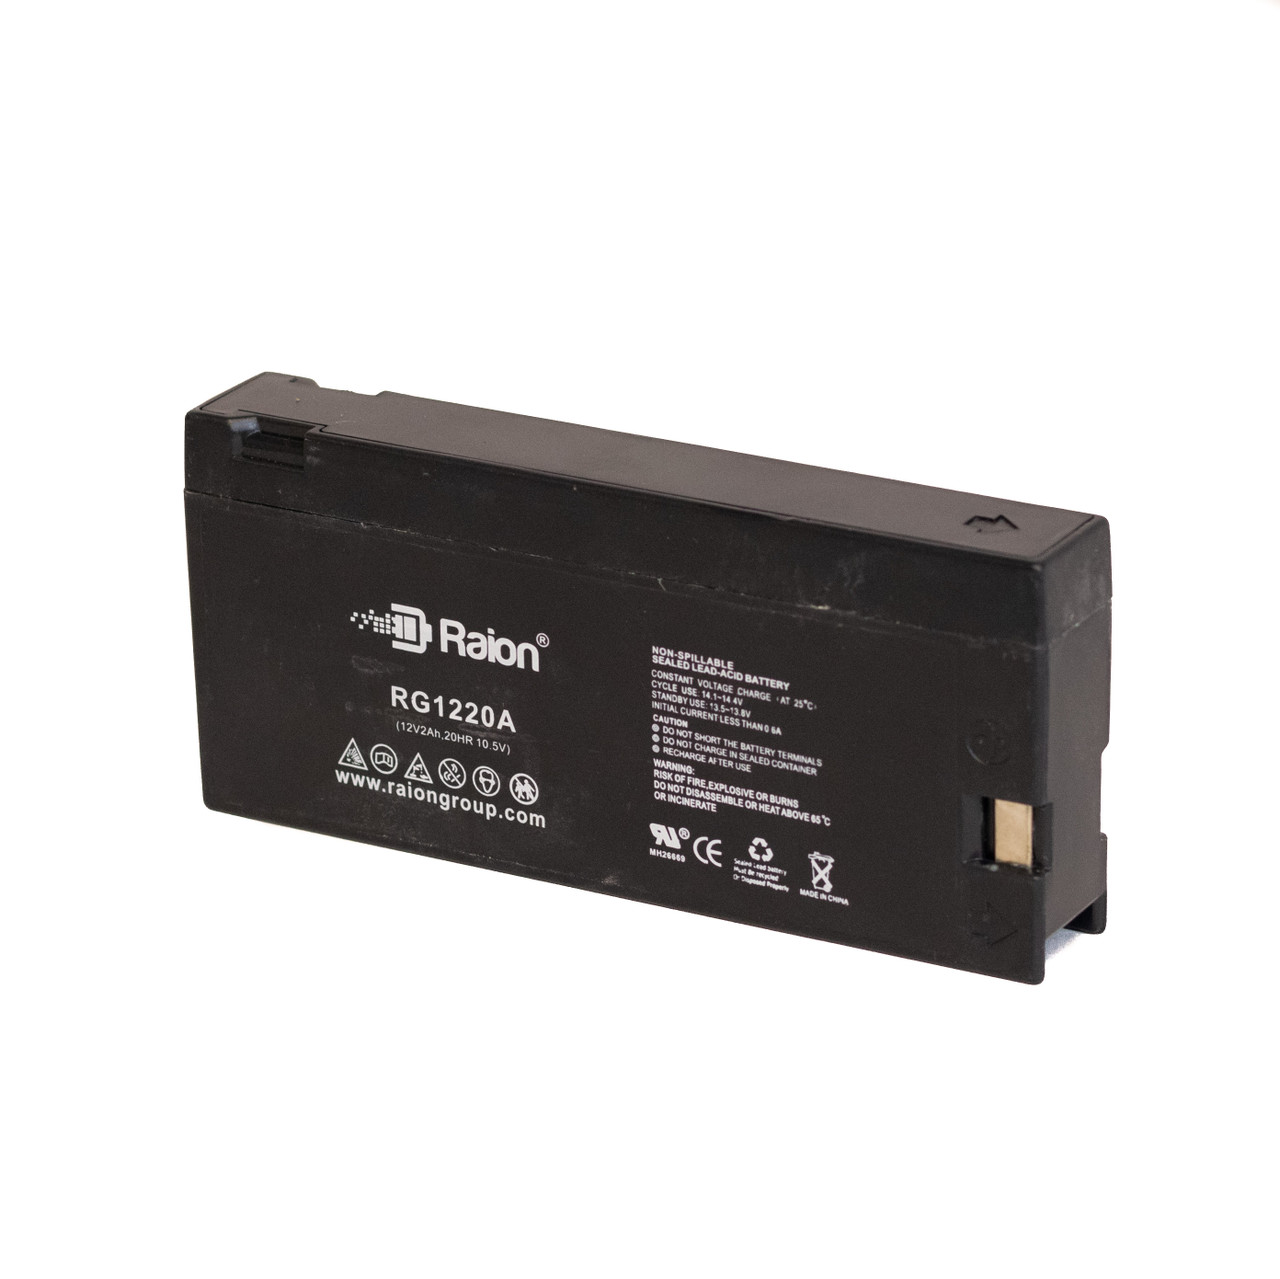 Raion Power RG1220A Replacement Battery for Magnavox CVK-312